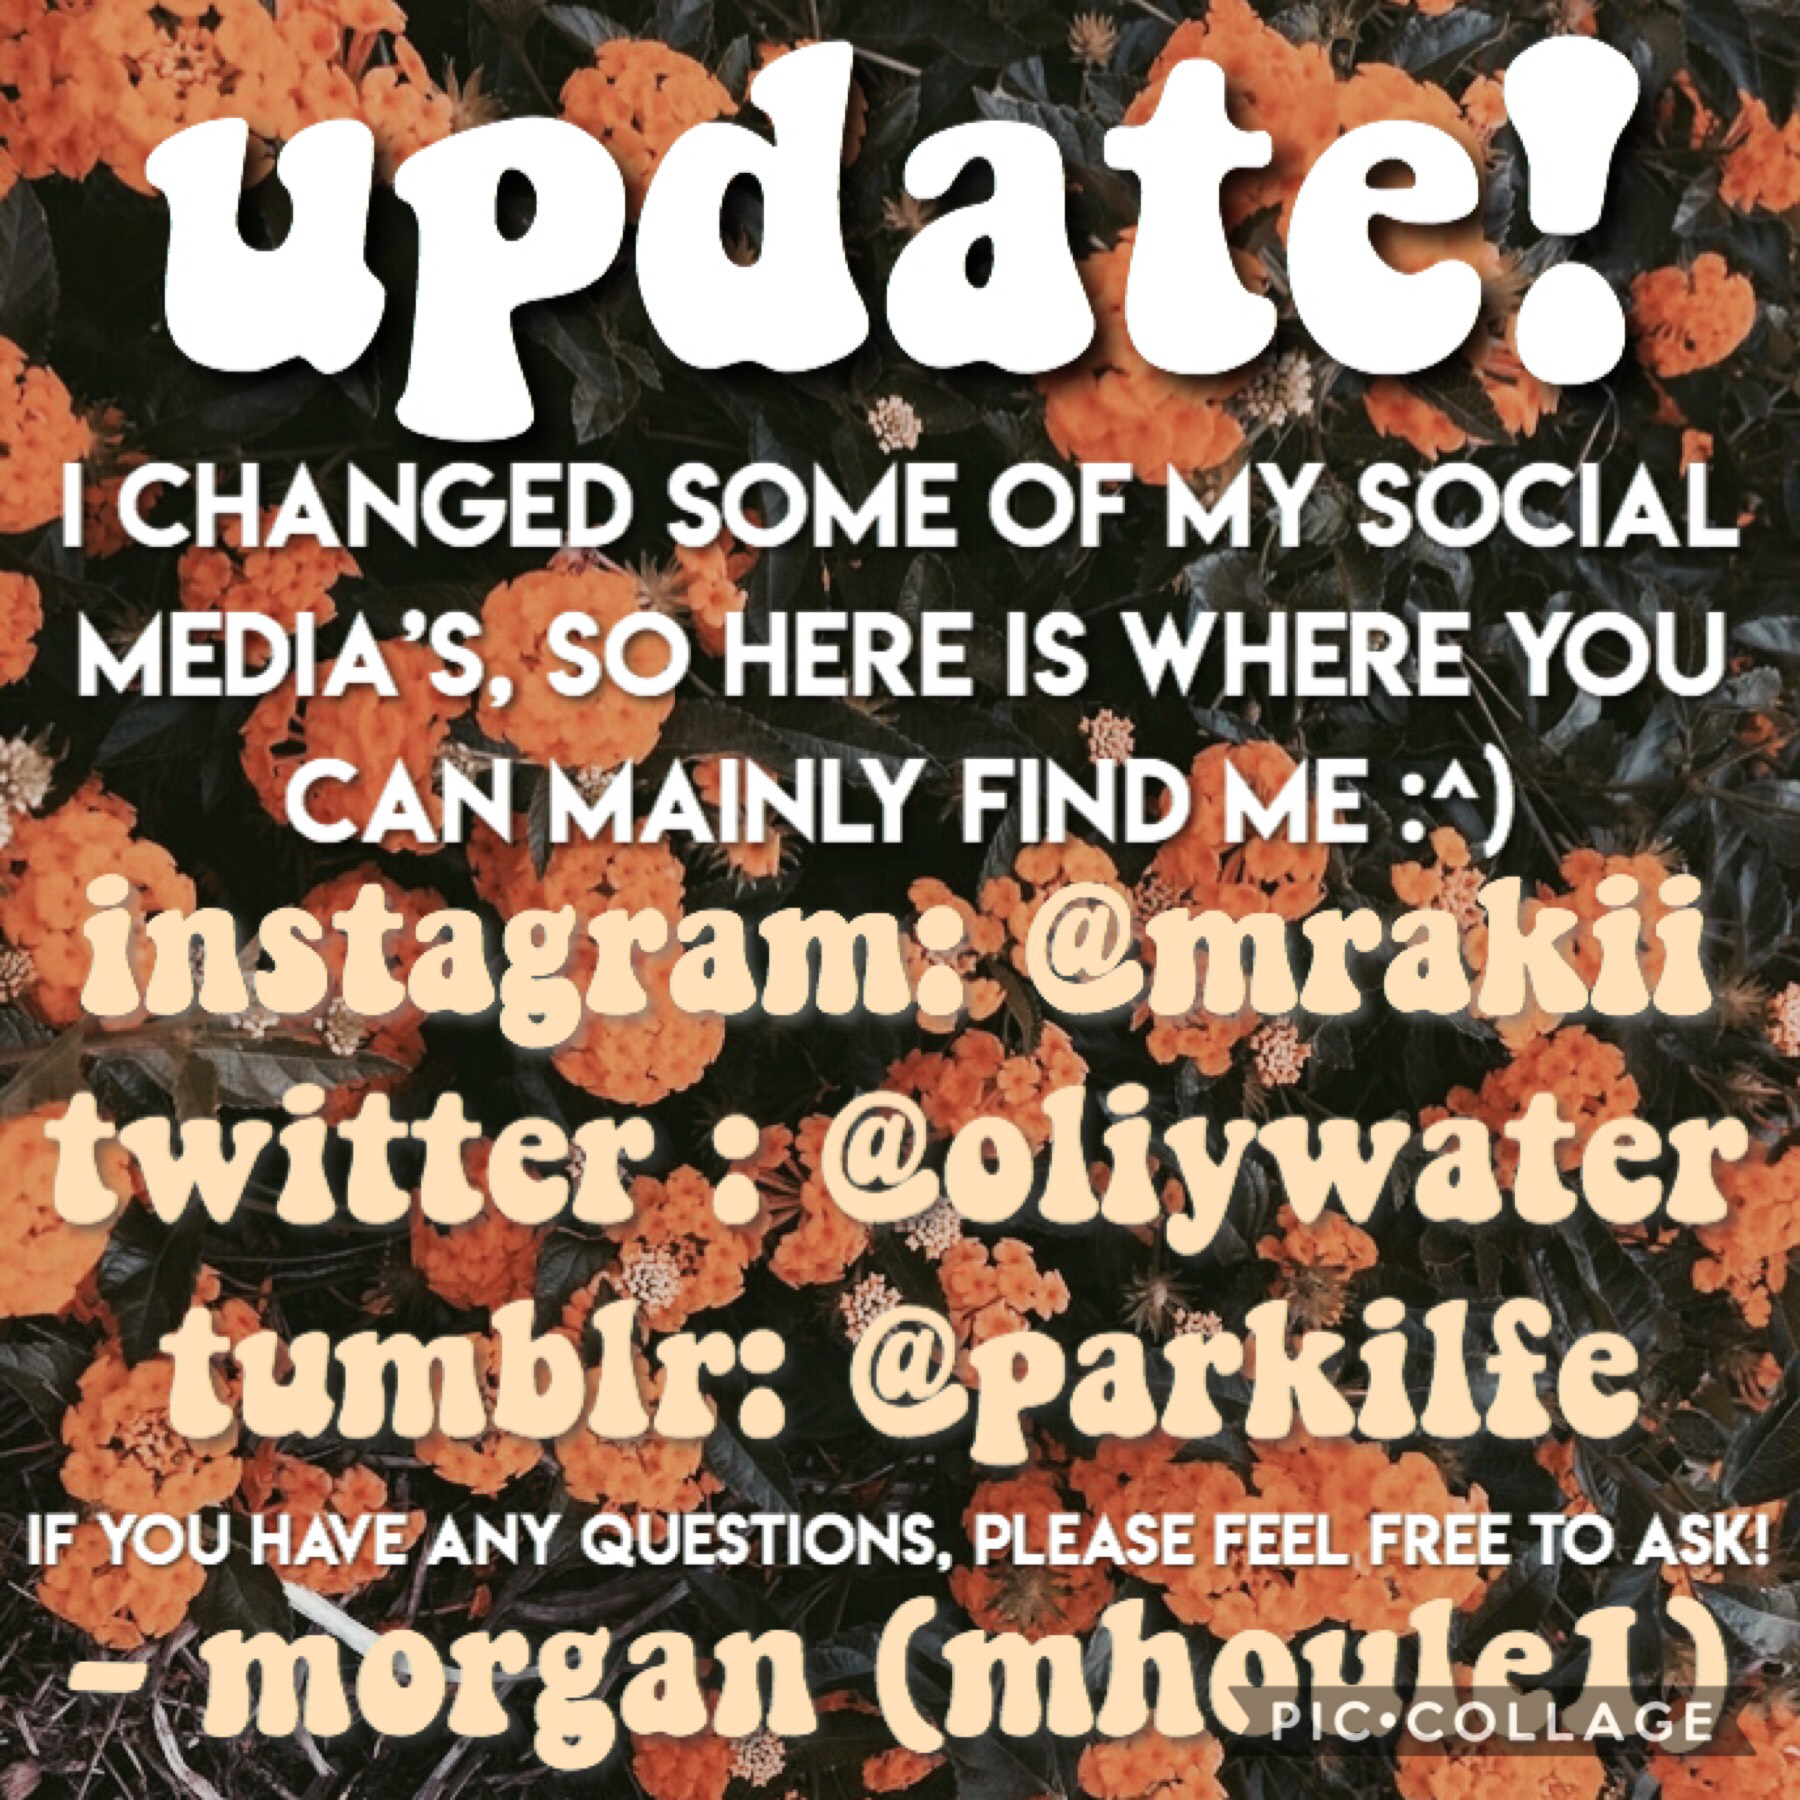 quick update! {click}
you are still welcome to follow my other accounts listed in my last post! I just wanted to let you know that some things have changed and these are my main accounts! thank you!!